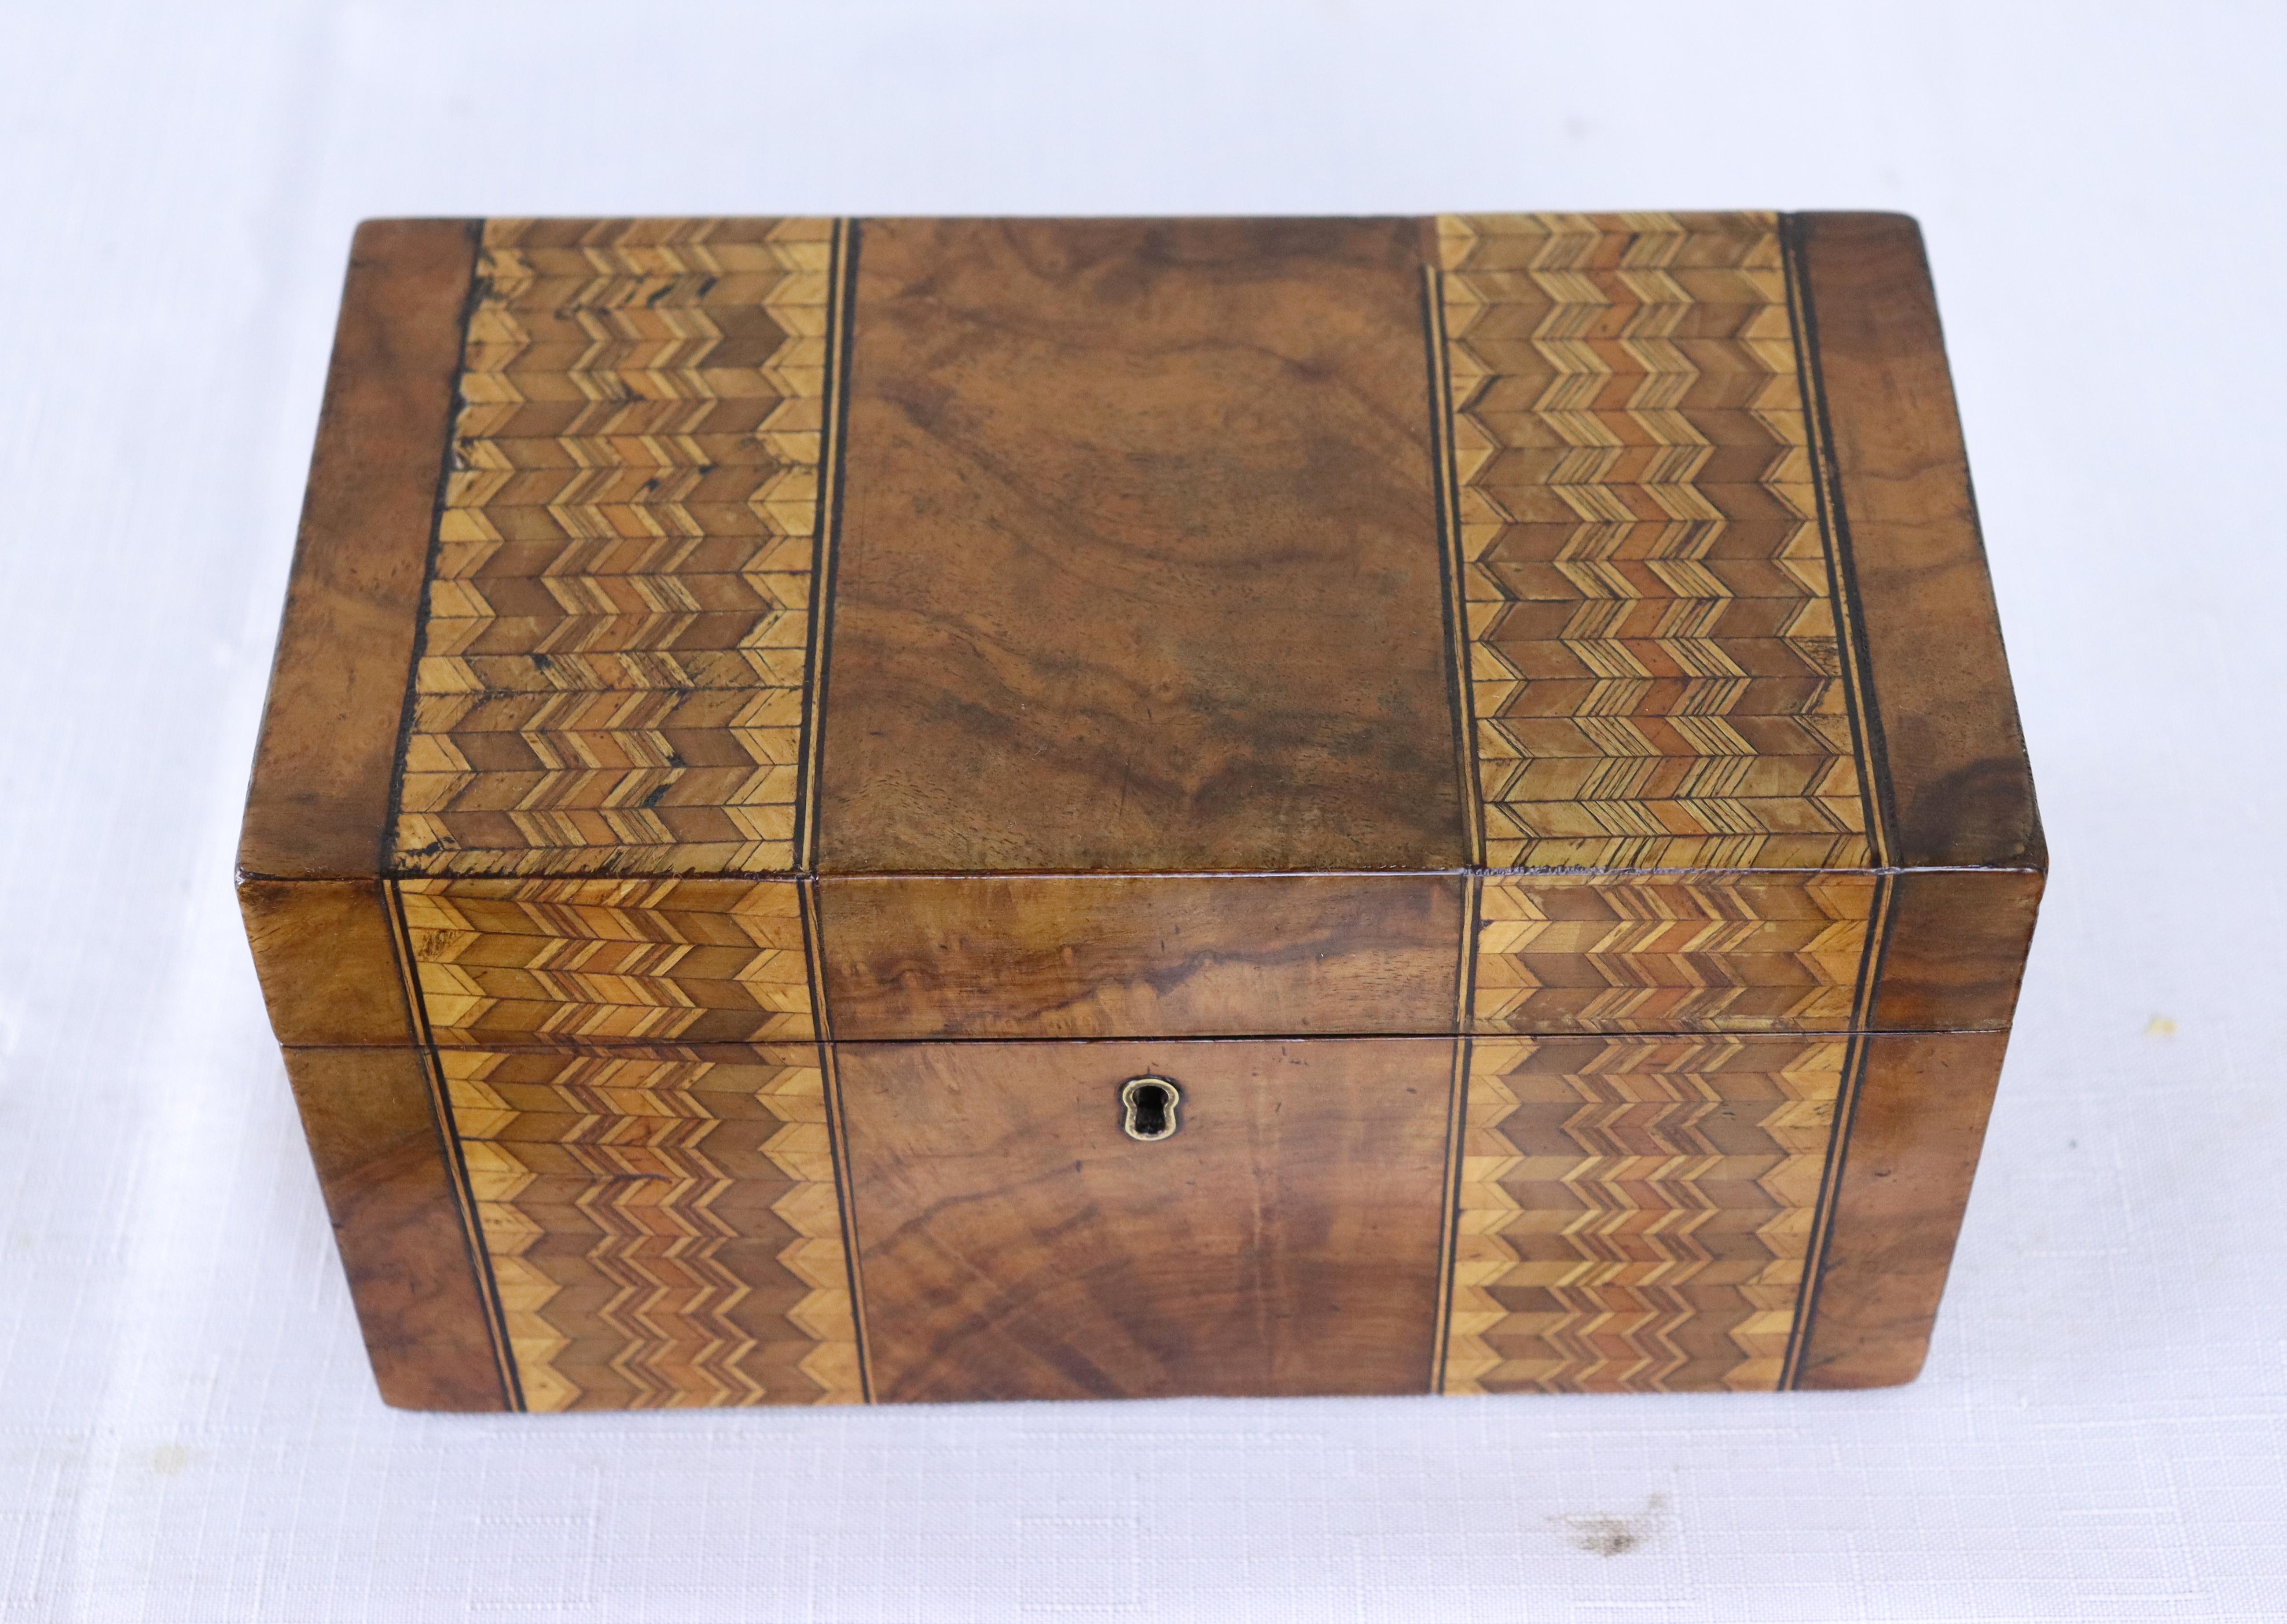 A decorative walnut Tumbridgeware tea caddy with two interior compartments. Tumbridgeware being characterized as a form of decoratively inlaid woodwork, typically in the form of boxes, that is characteristic of Tumbridge and the spa town of Royal